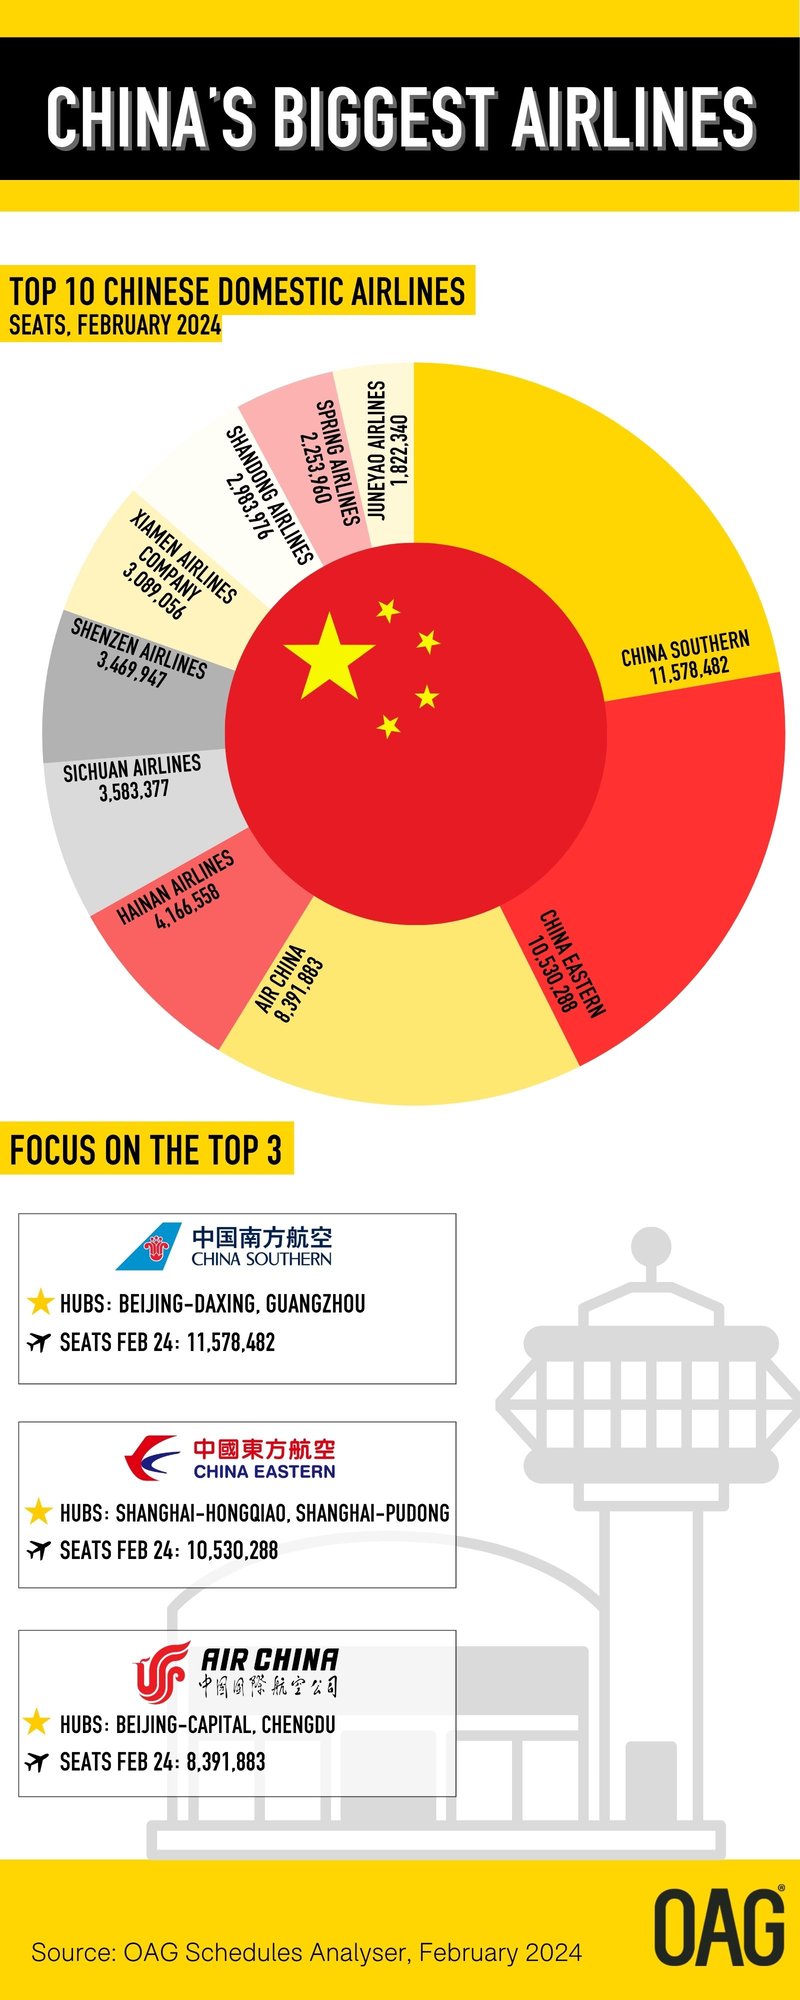 Chinas Biggest Airlines (1600 x 4000 px) (5)